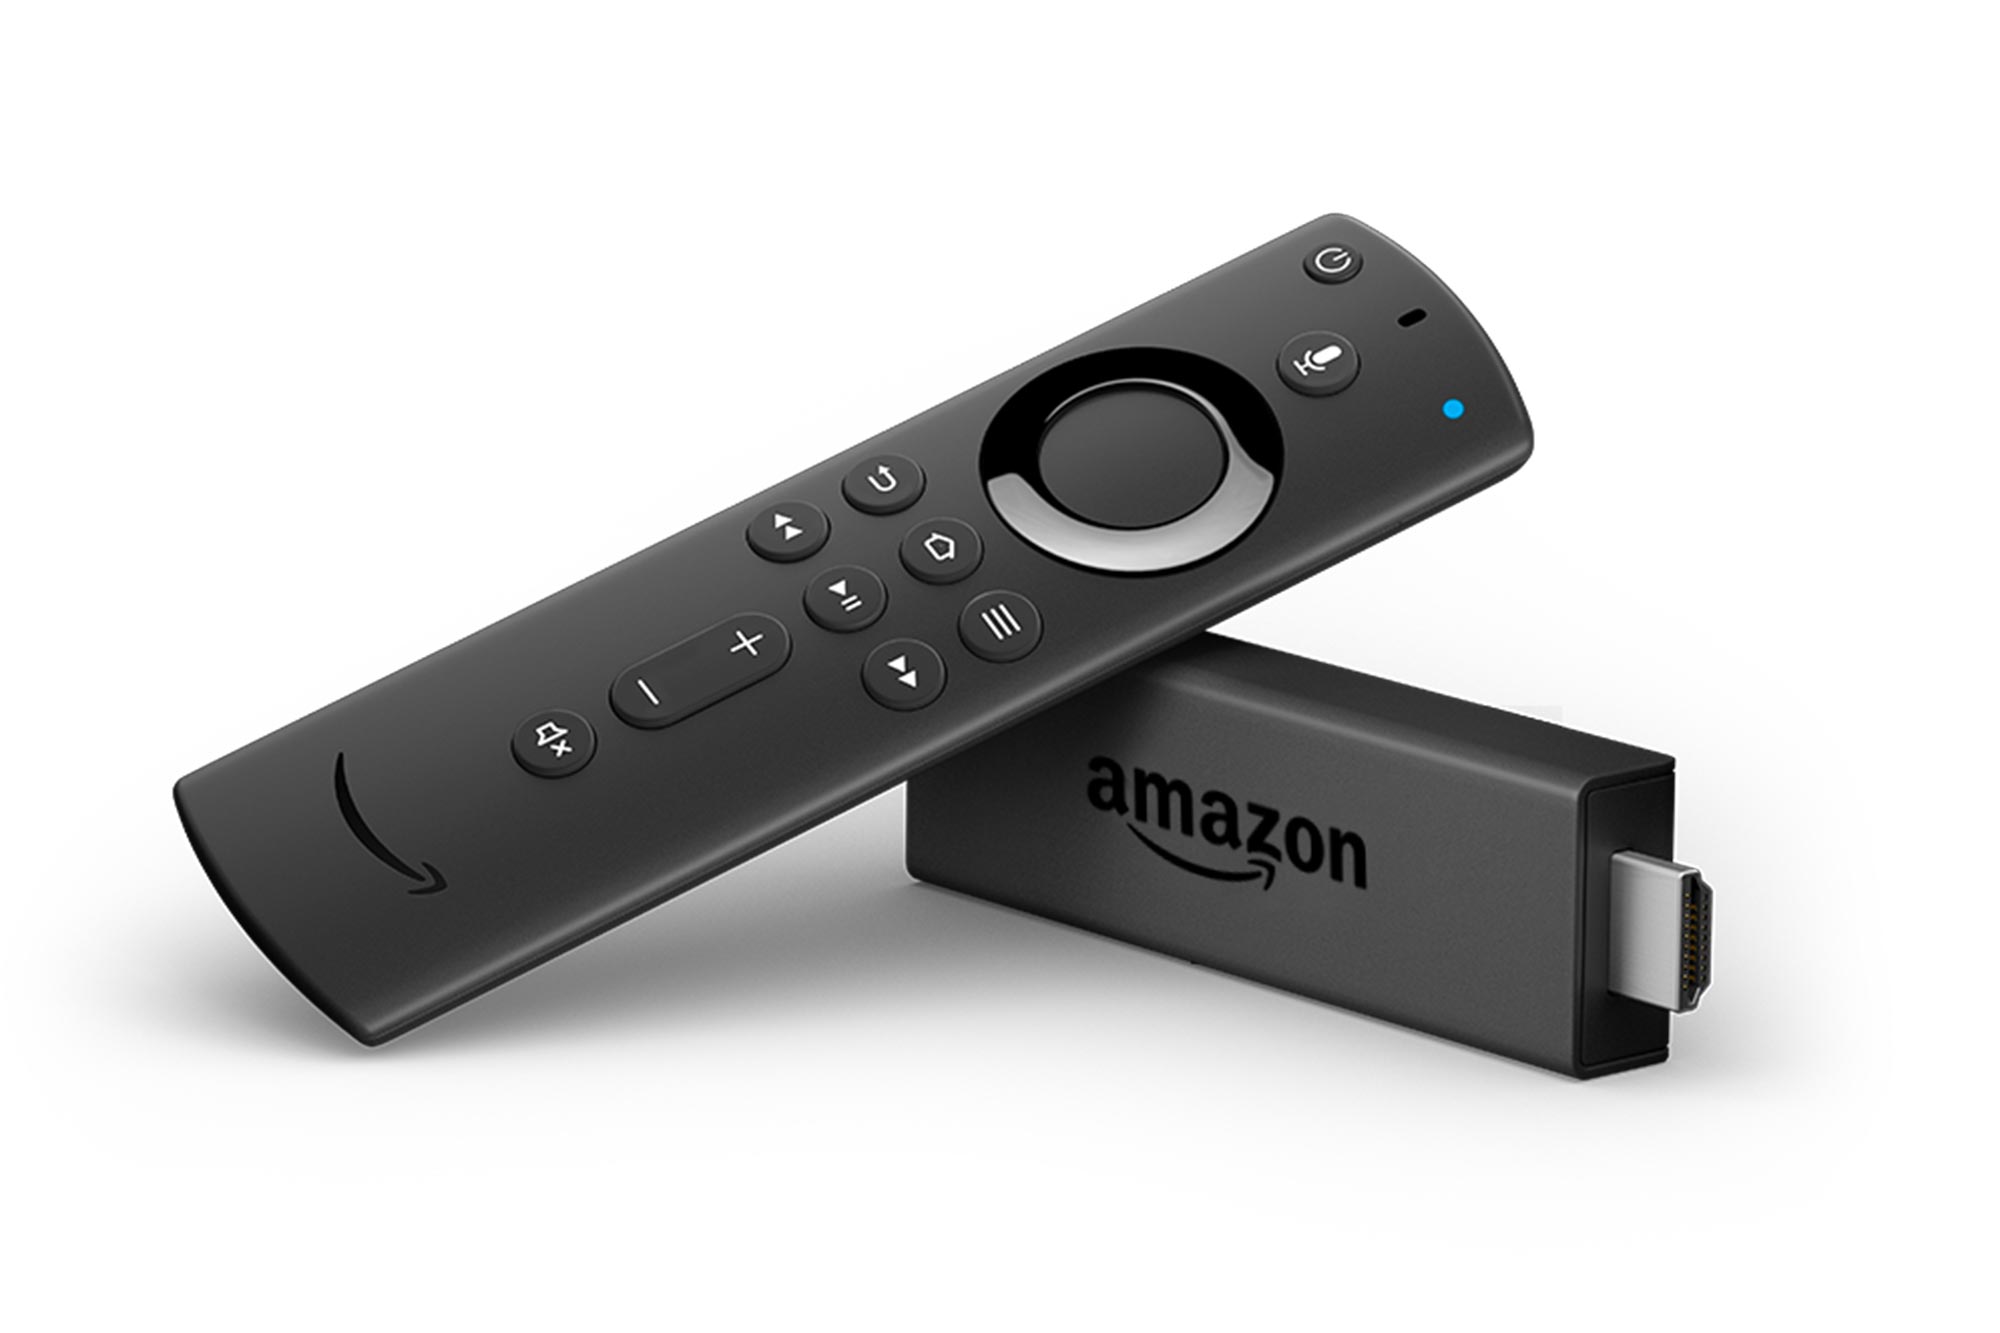 Amazon Fire Stick: What You Need To Know